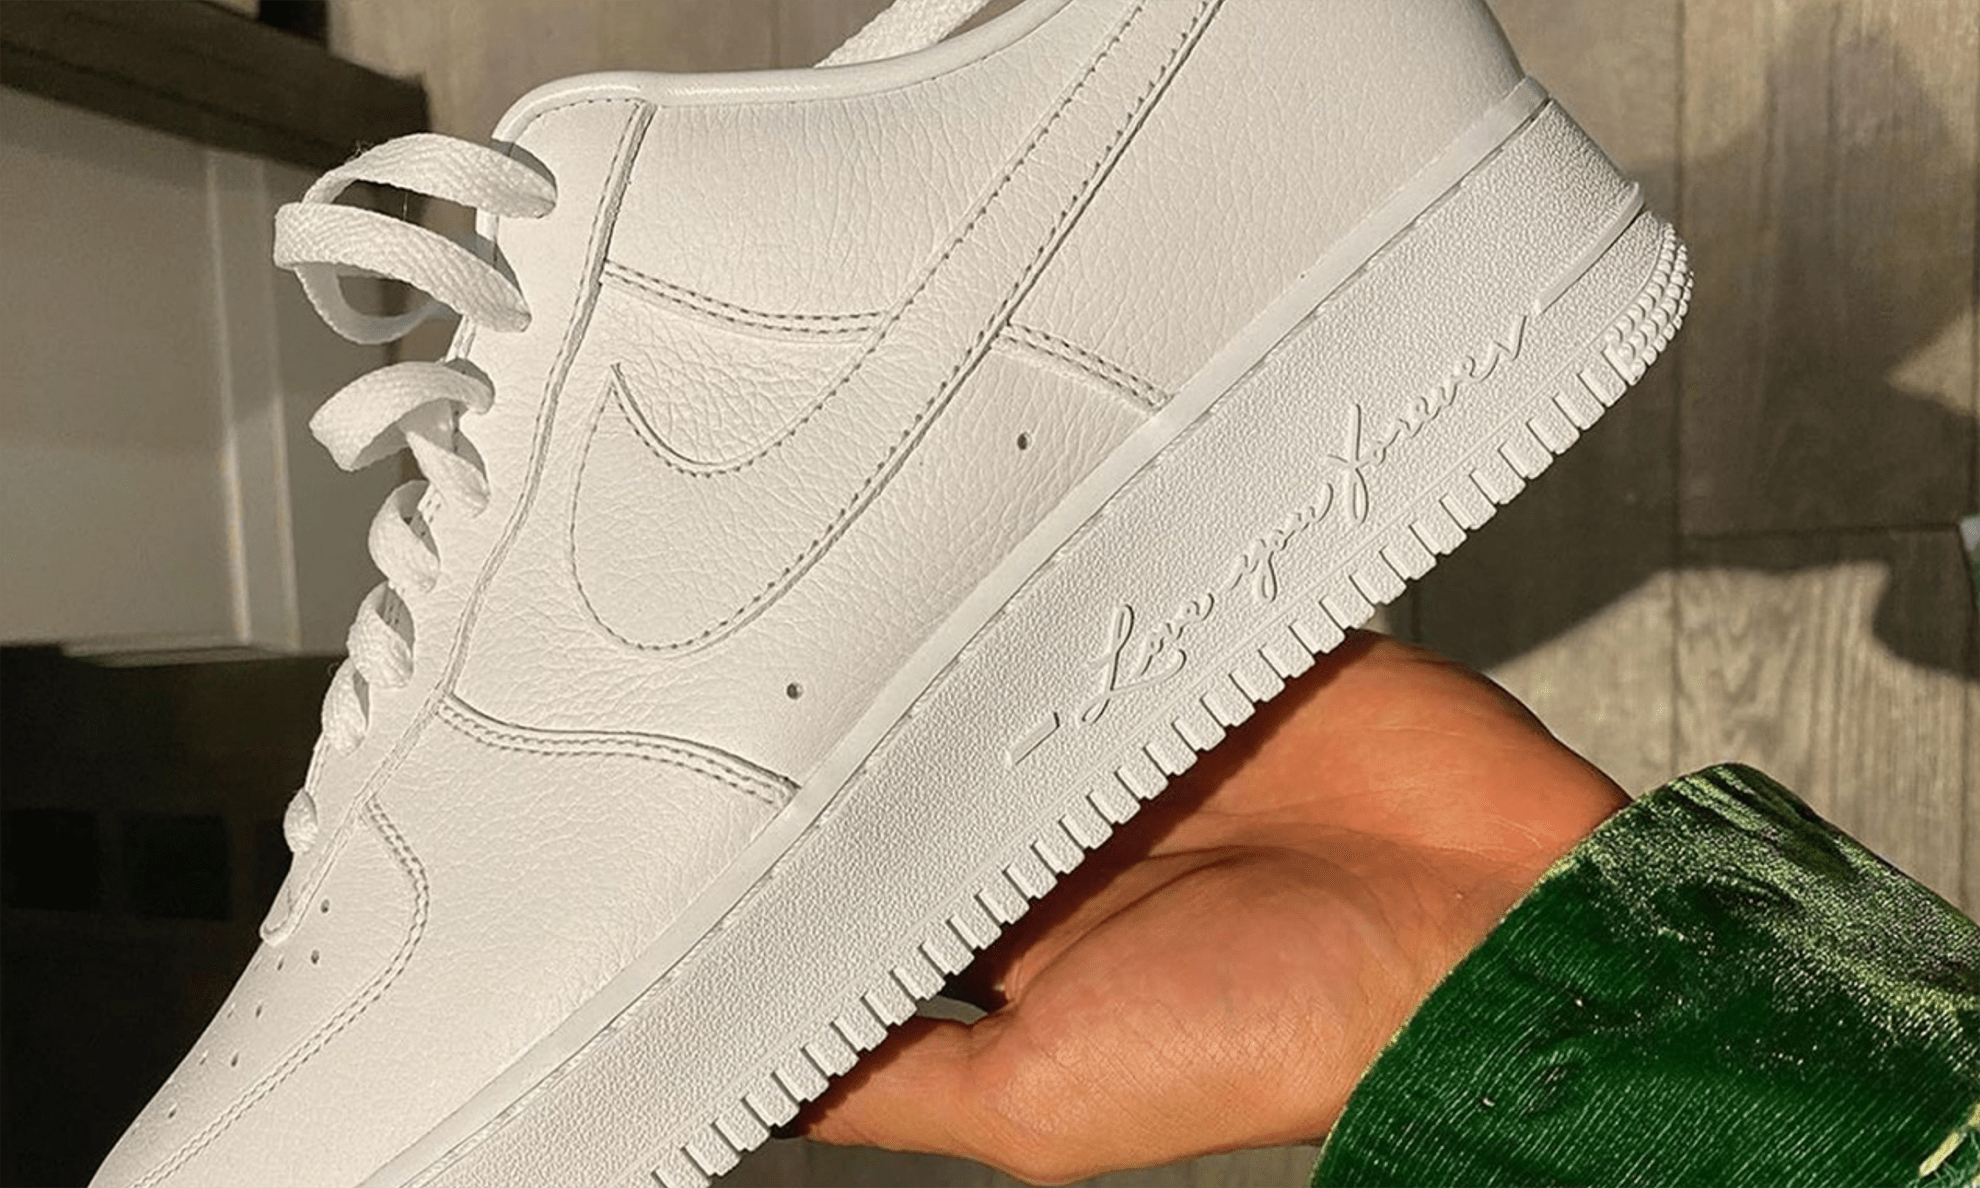 Drake x Nike Air Force 1 Low 「Certified Lover Boy」预告图释出